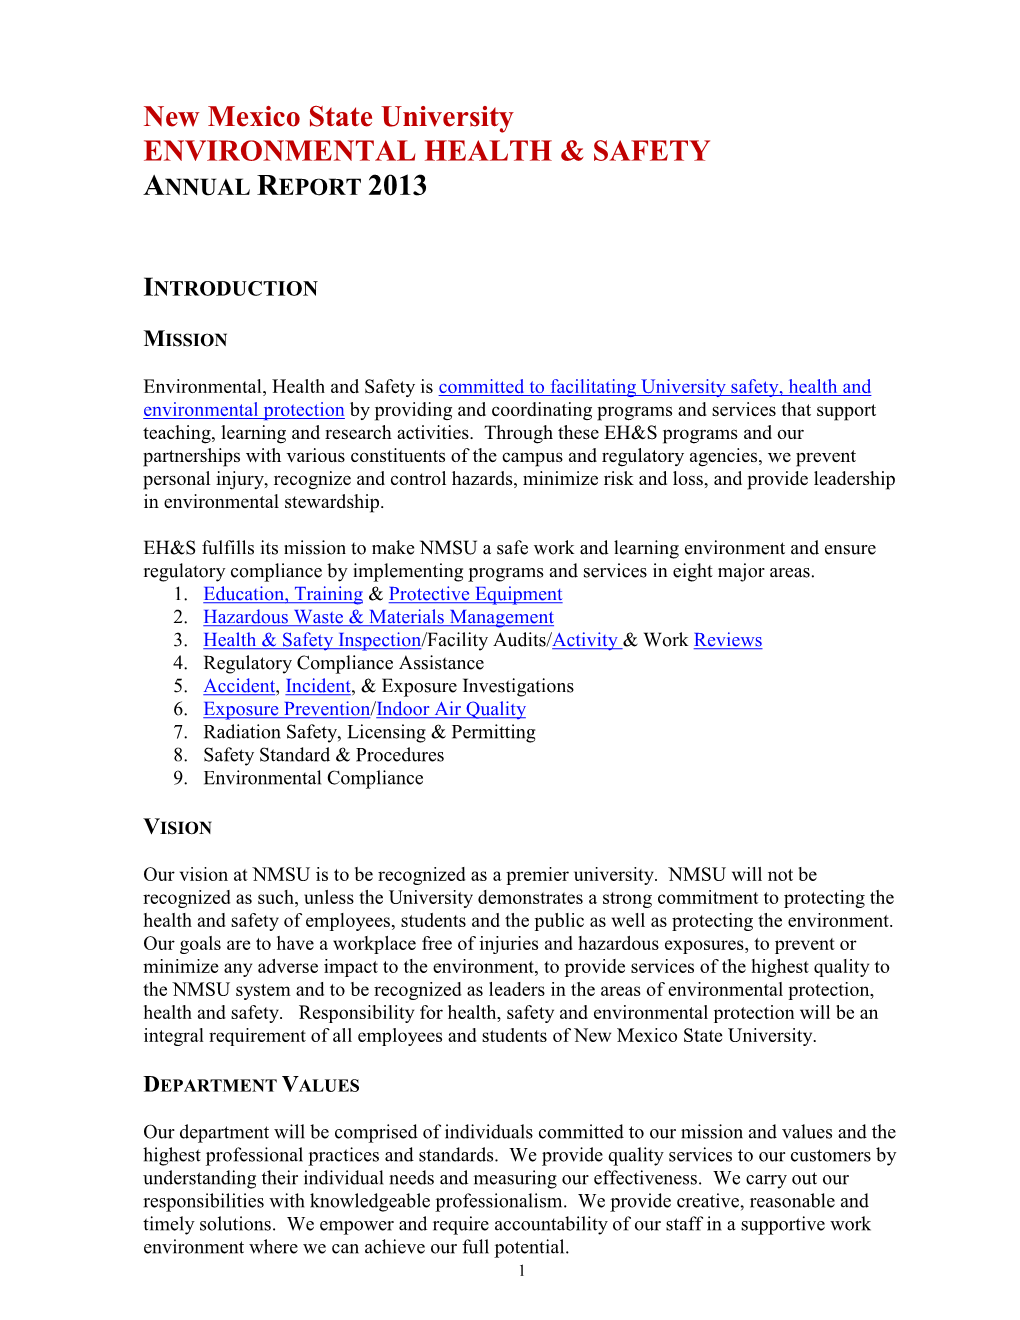 New Mexico State University ENVIRONMENTAL HEALTH & SAFETY ANNUAL REPORT 2013